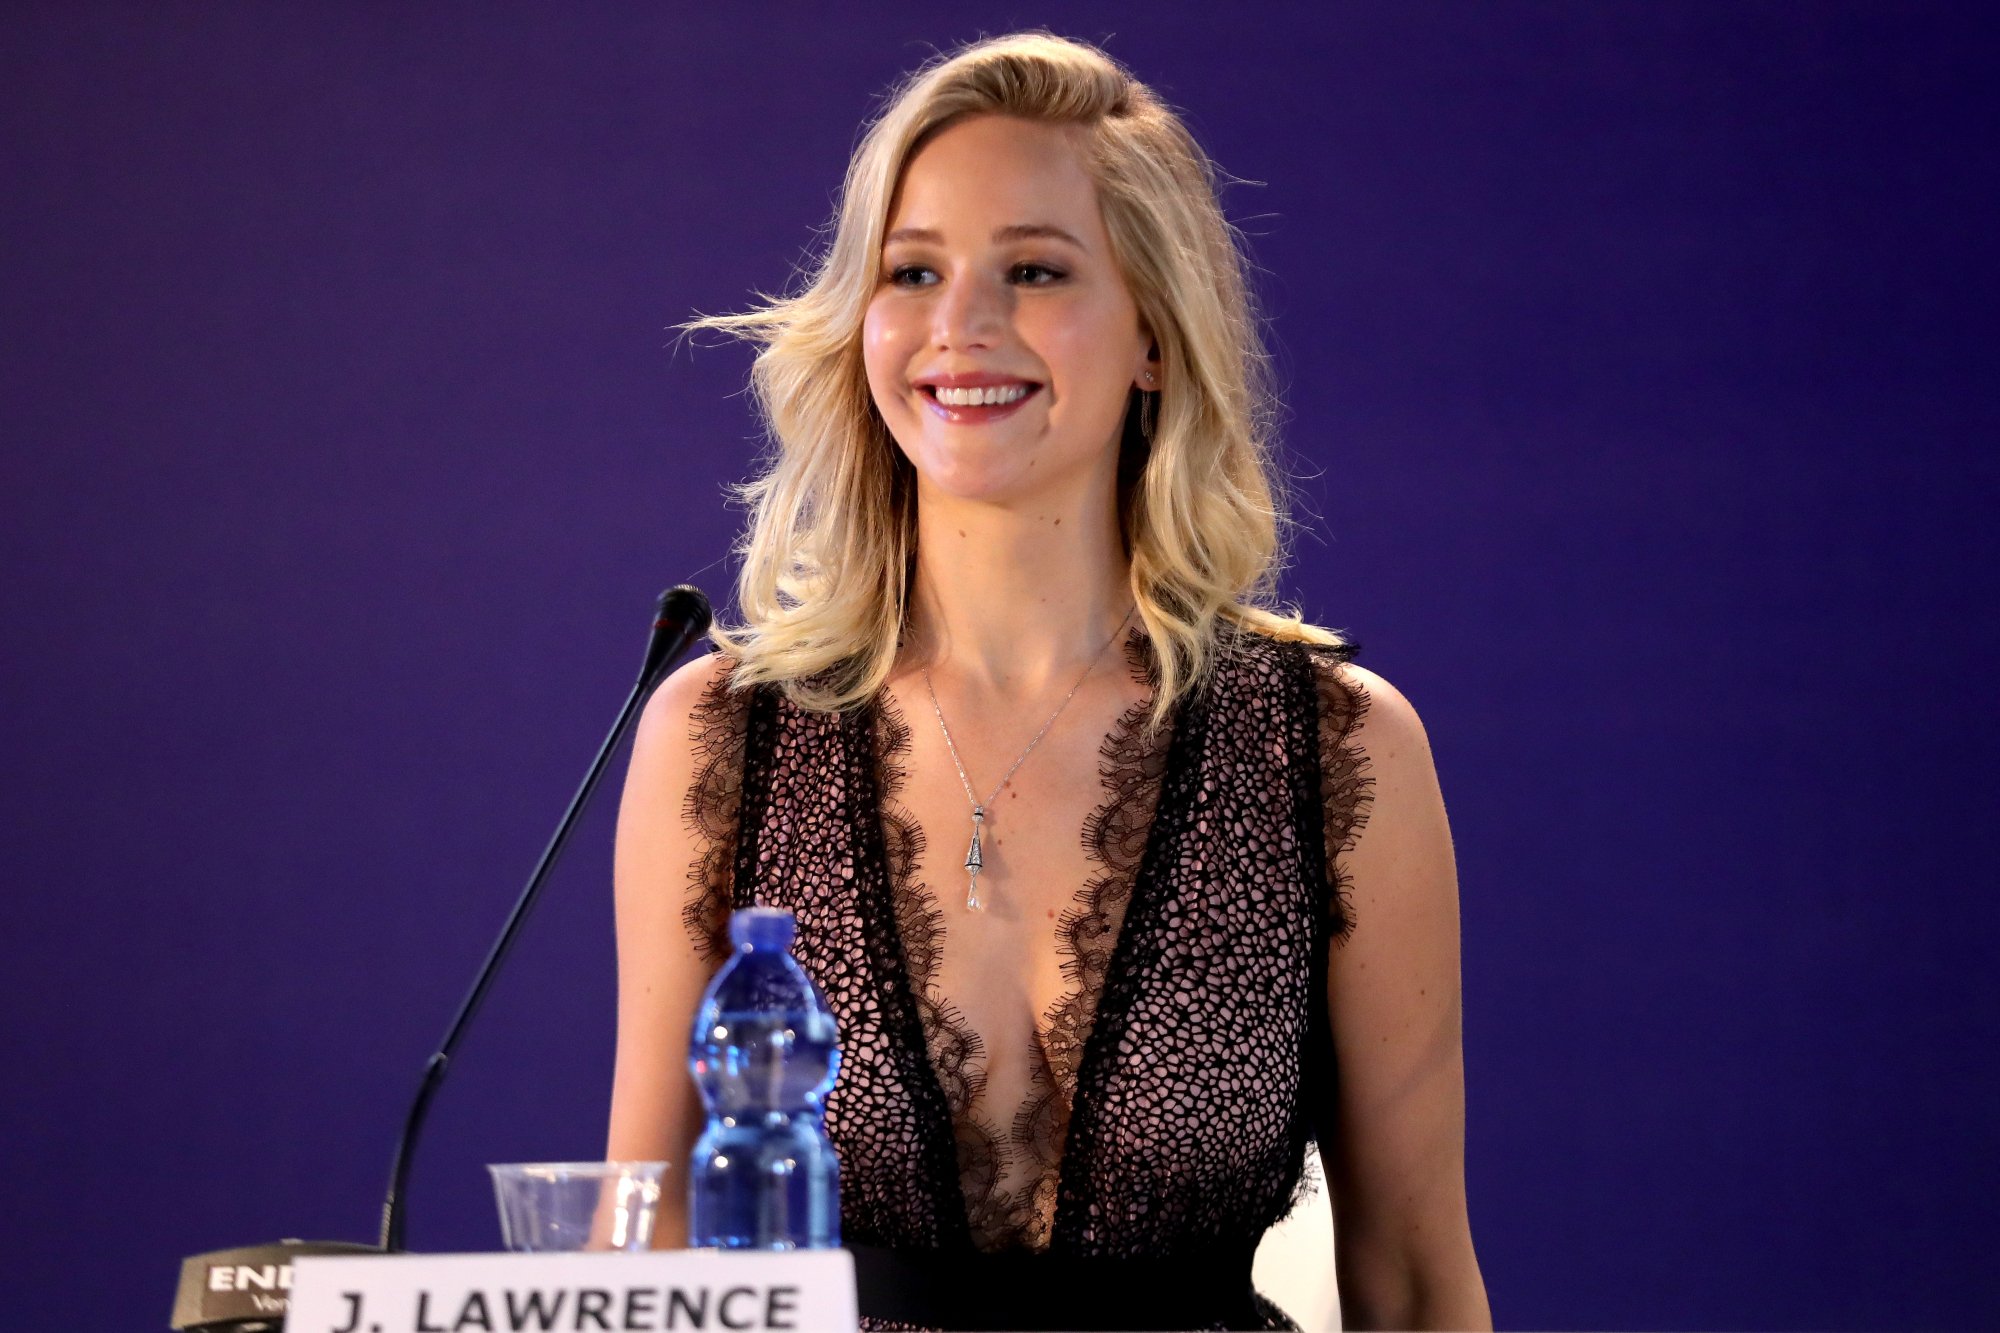 'Don't Look Up' star Jennifer Lawrence wearing a black dress behind a microphone